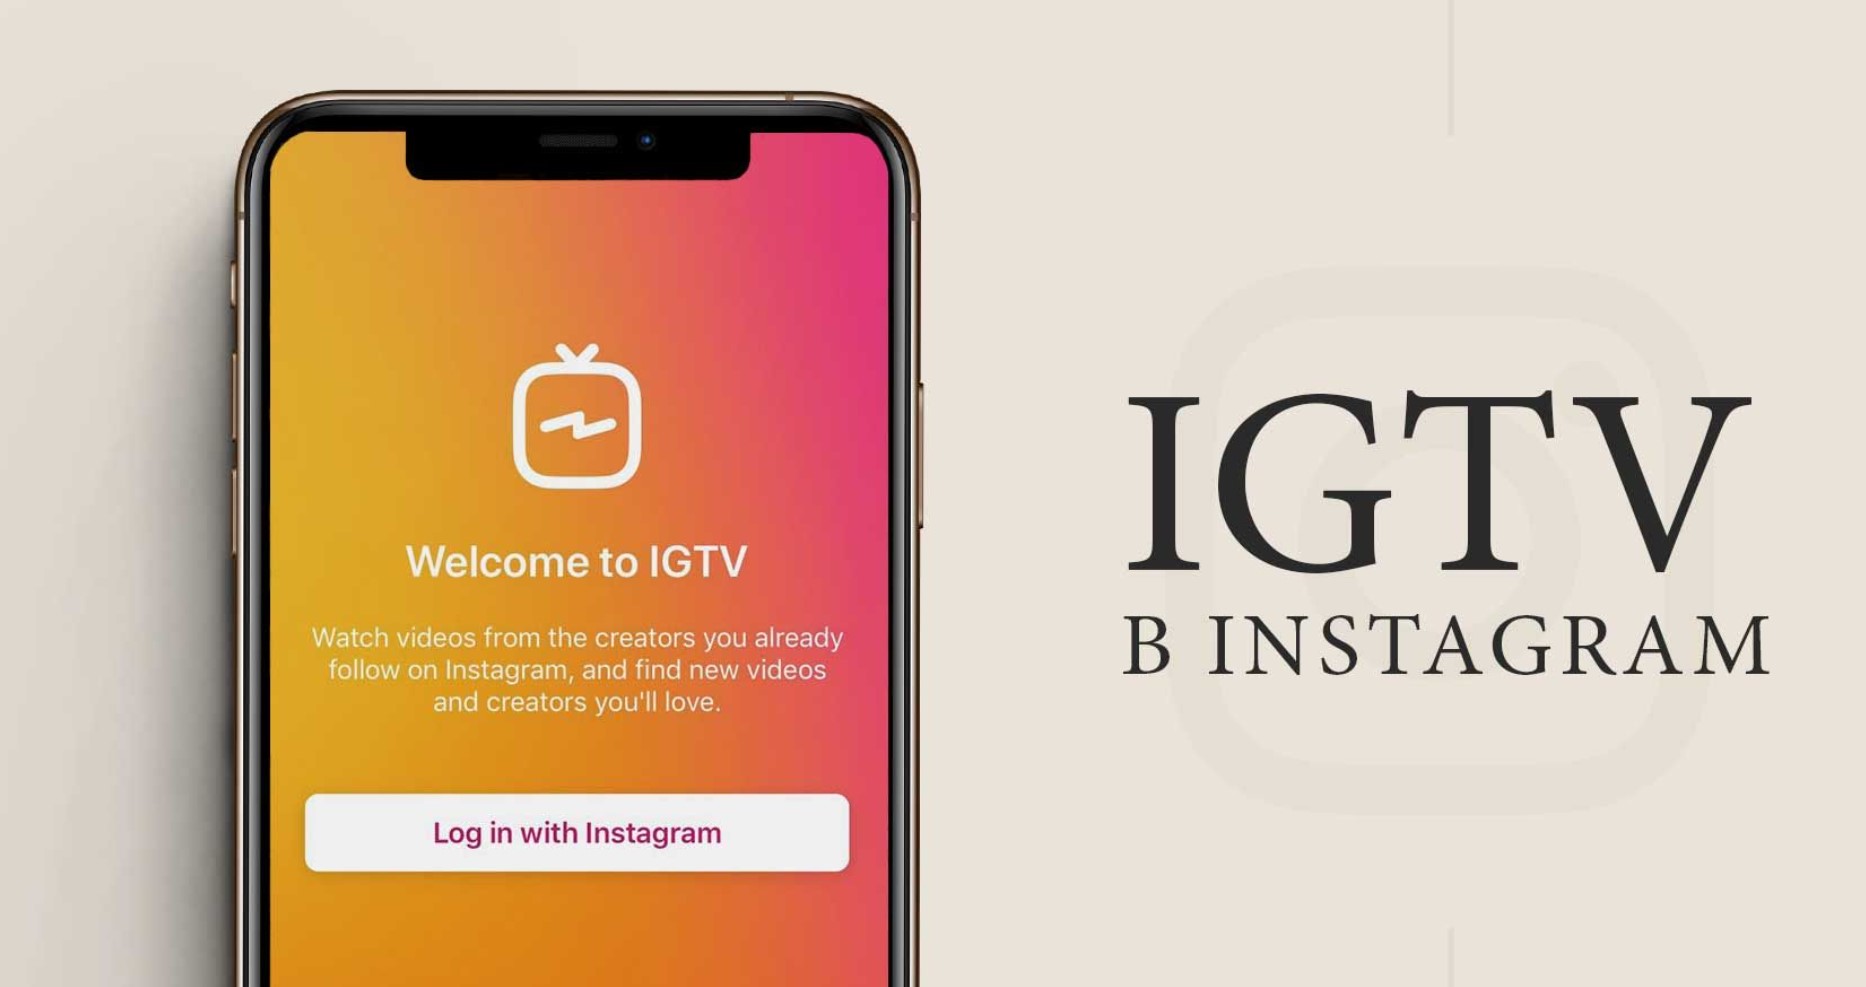 IGTV Enigma: A Guide to Downloading Instagram’s Long-Form Videos